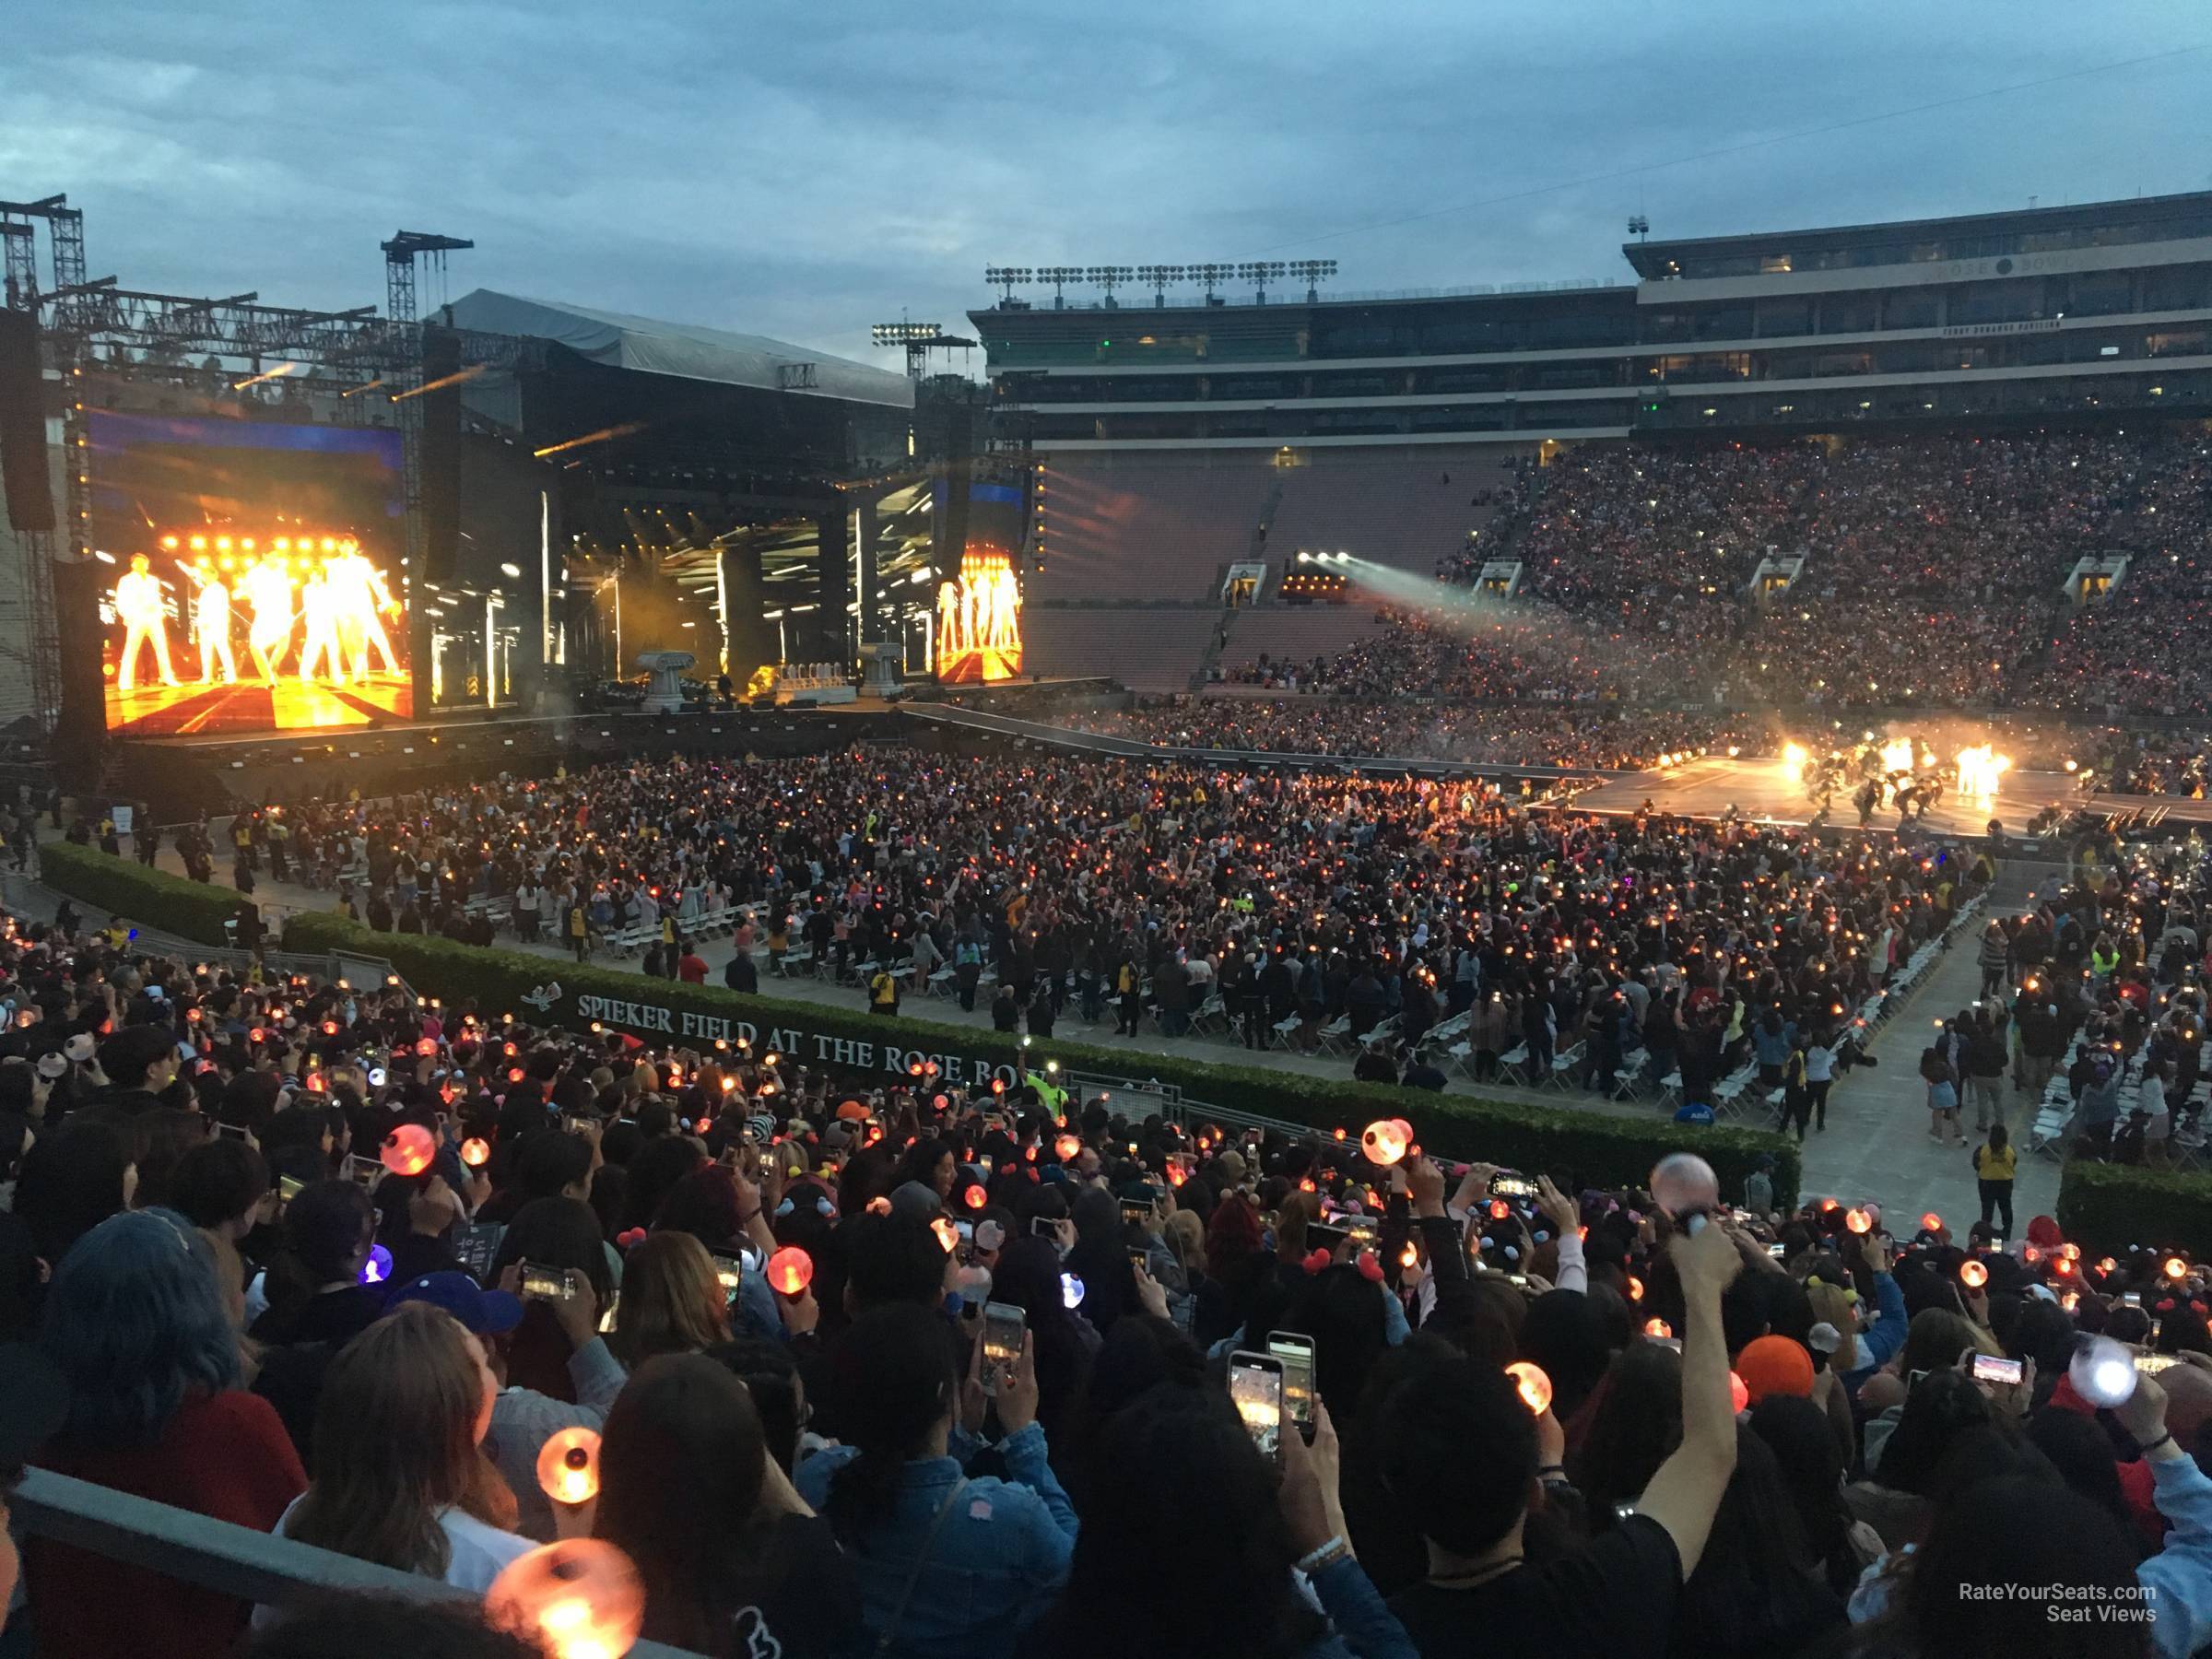 Rose Bowl Seating Chart Rolling Stones 2019